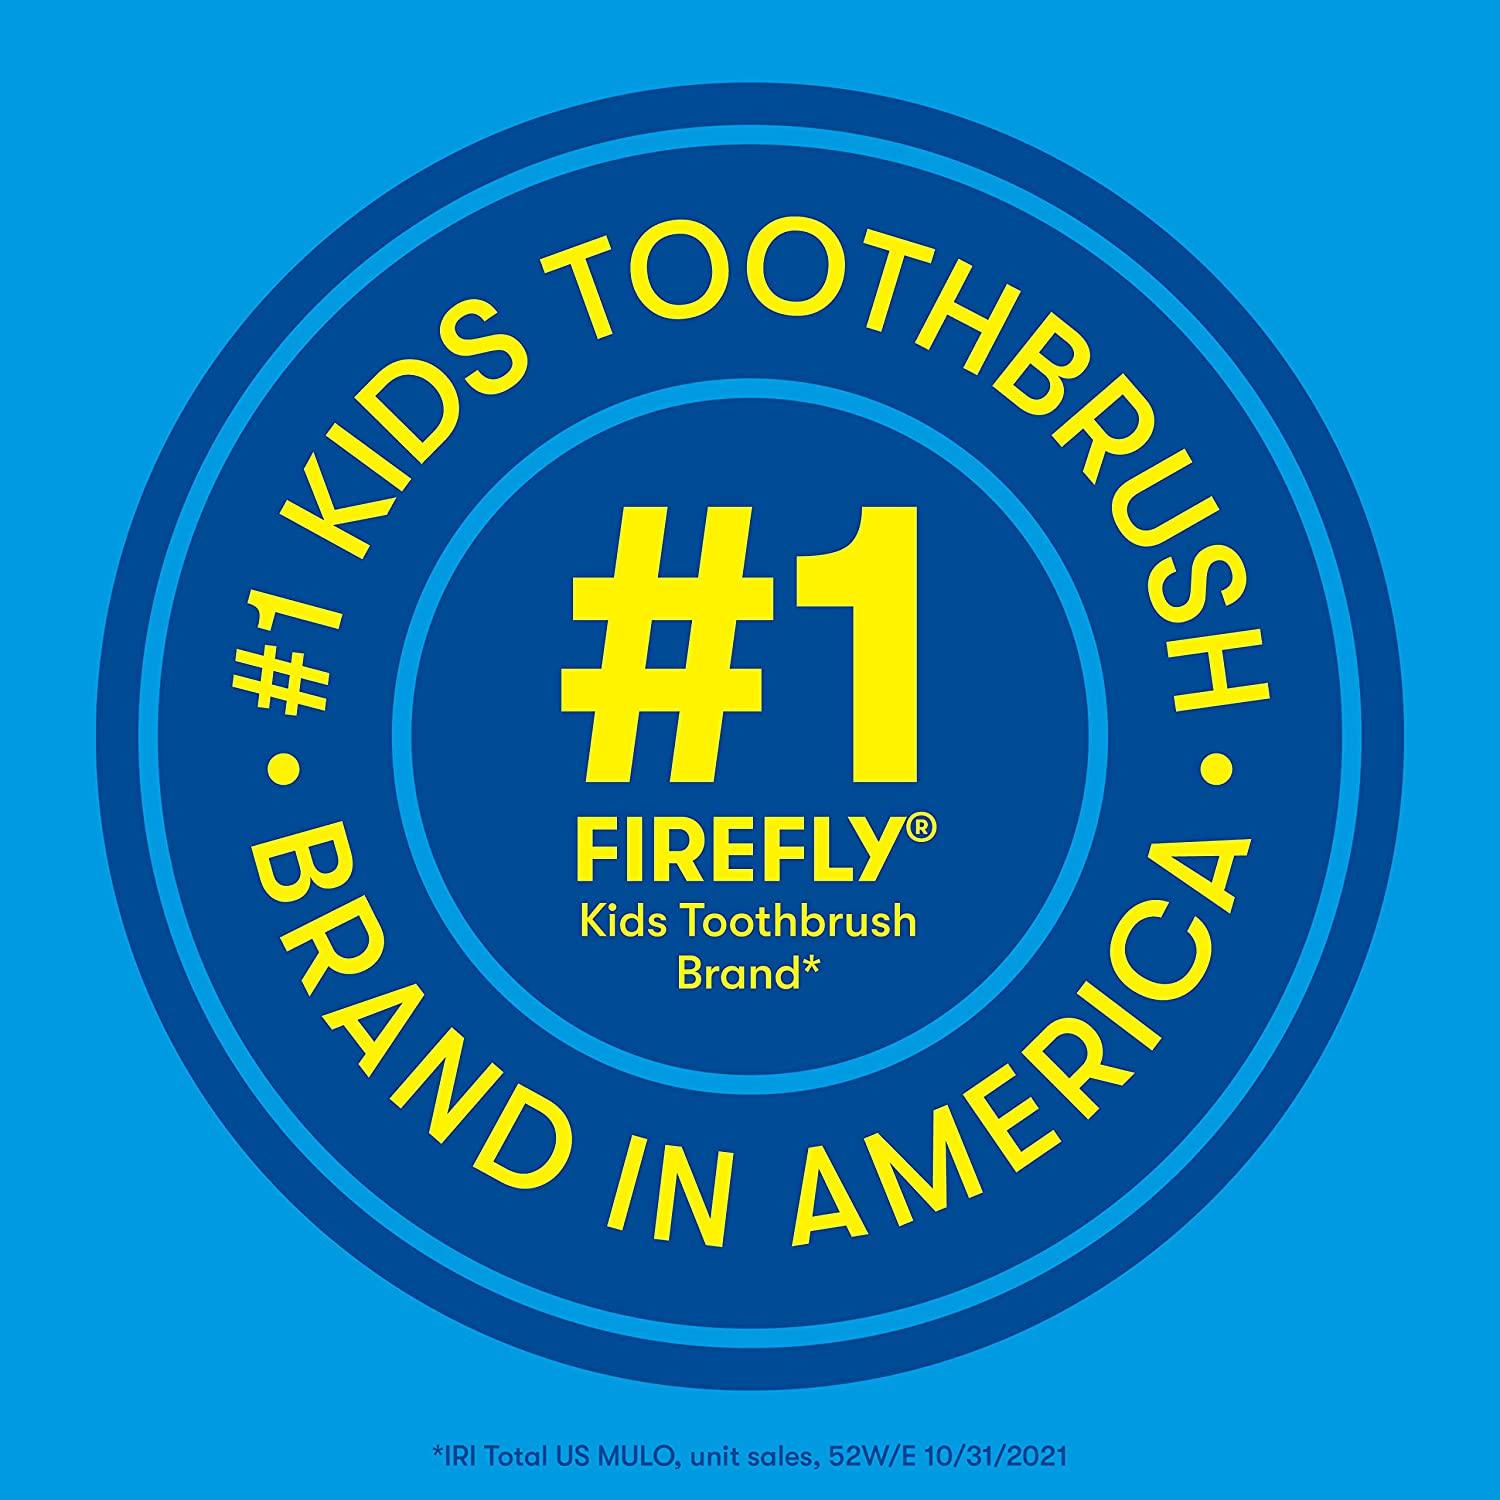 Firefly Clean N' Protect Spongebob Power Toothbrush - BumbleToys - 5-7 Years, Baby Saftey & Health, Boys, Girls, Pre-Order, Toothbrush